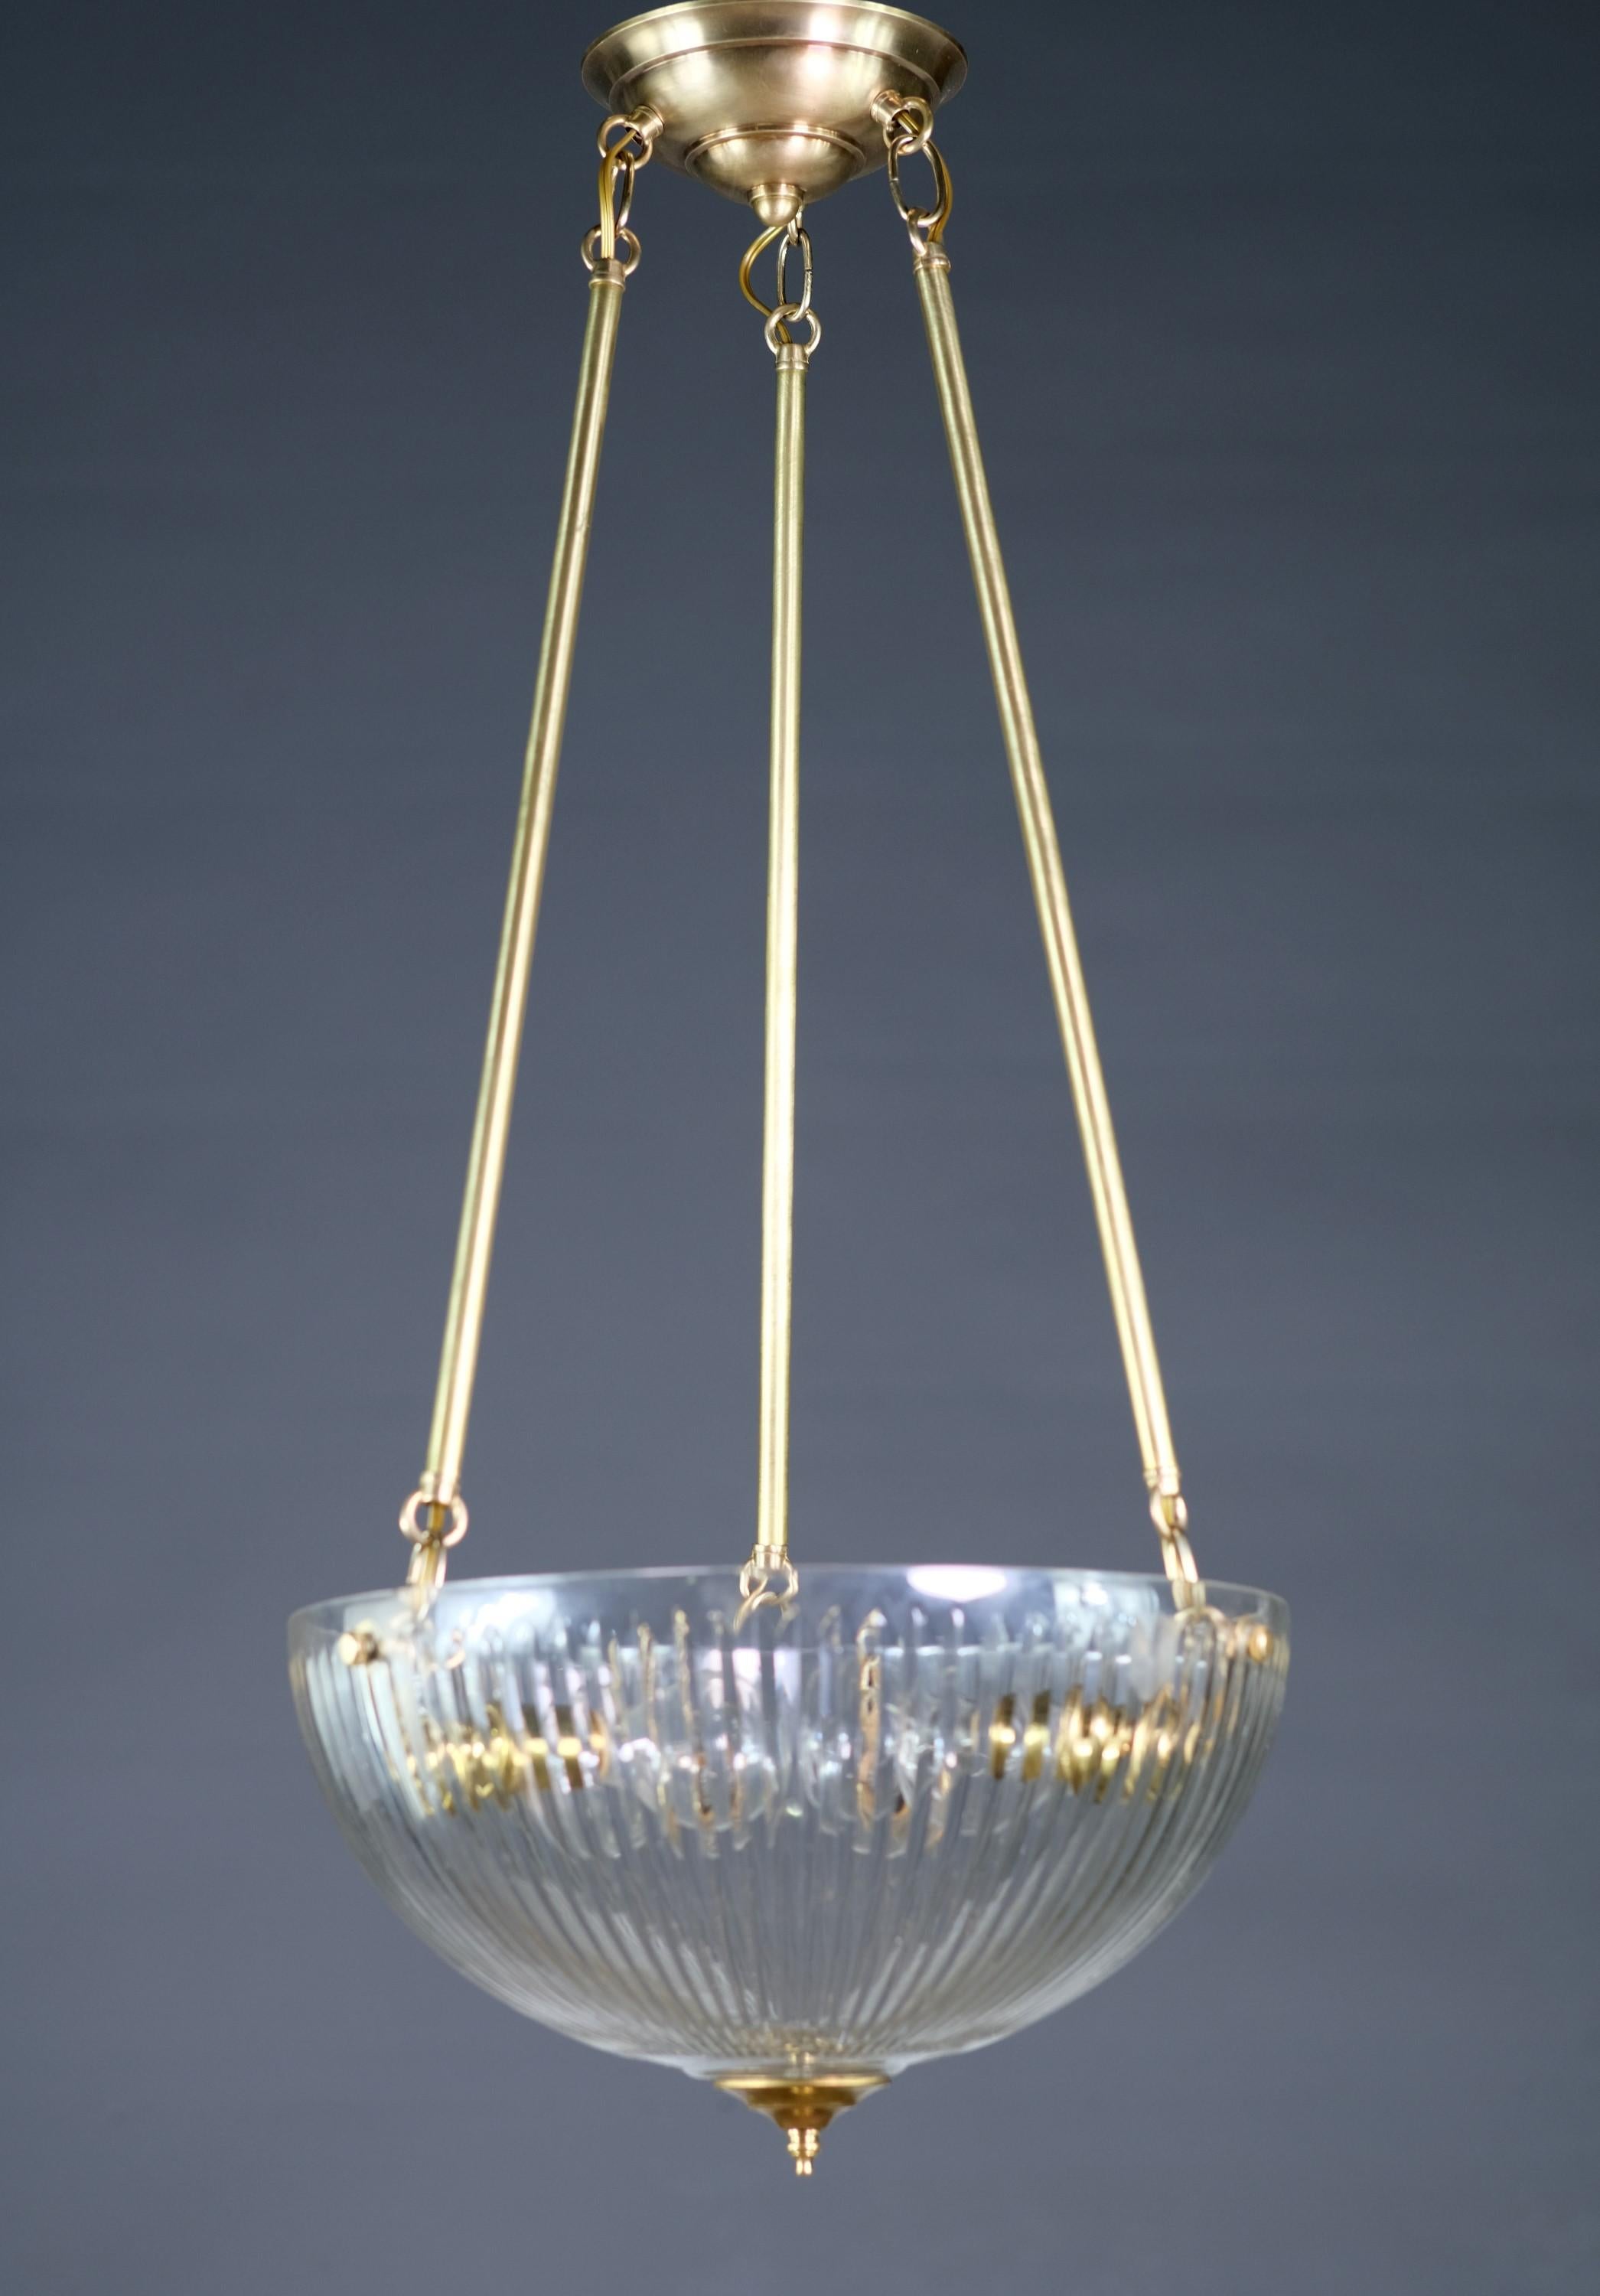 Brushed brass pendant light. Features a clear ribbed glass dish shade. Cleaned and rewired. Small quantity available at time of posting. Priced each. Please inquire. Please note, this item is located in our Scranton, PA location.